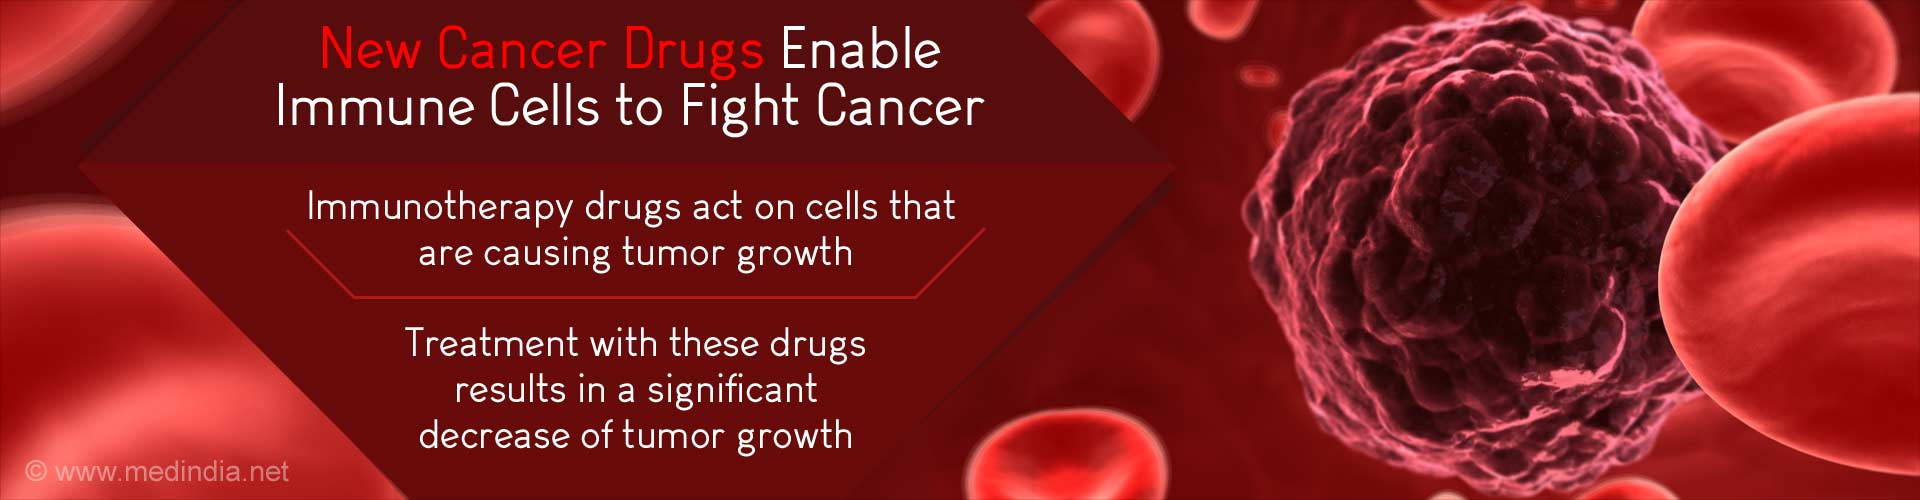 new cancer drugs enable immune cells to fight cancer
- immunotherapy drugs act o cells that are causing tumor growth
- treatment with these drugs results in a significant decrease of tumor growth
